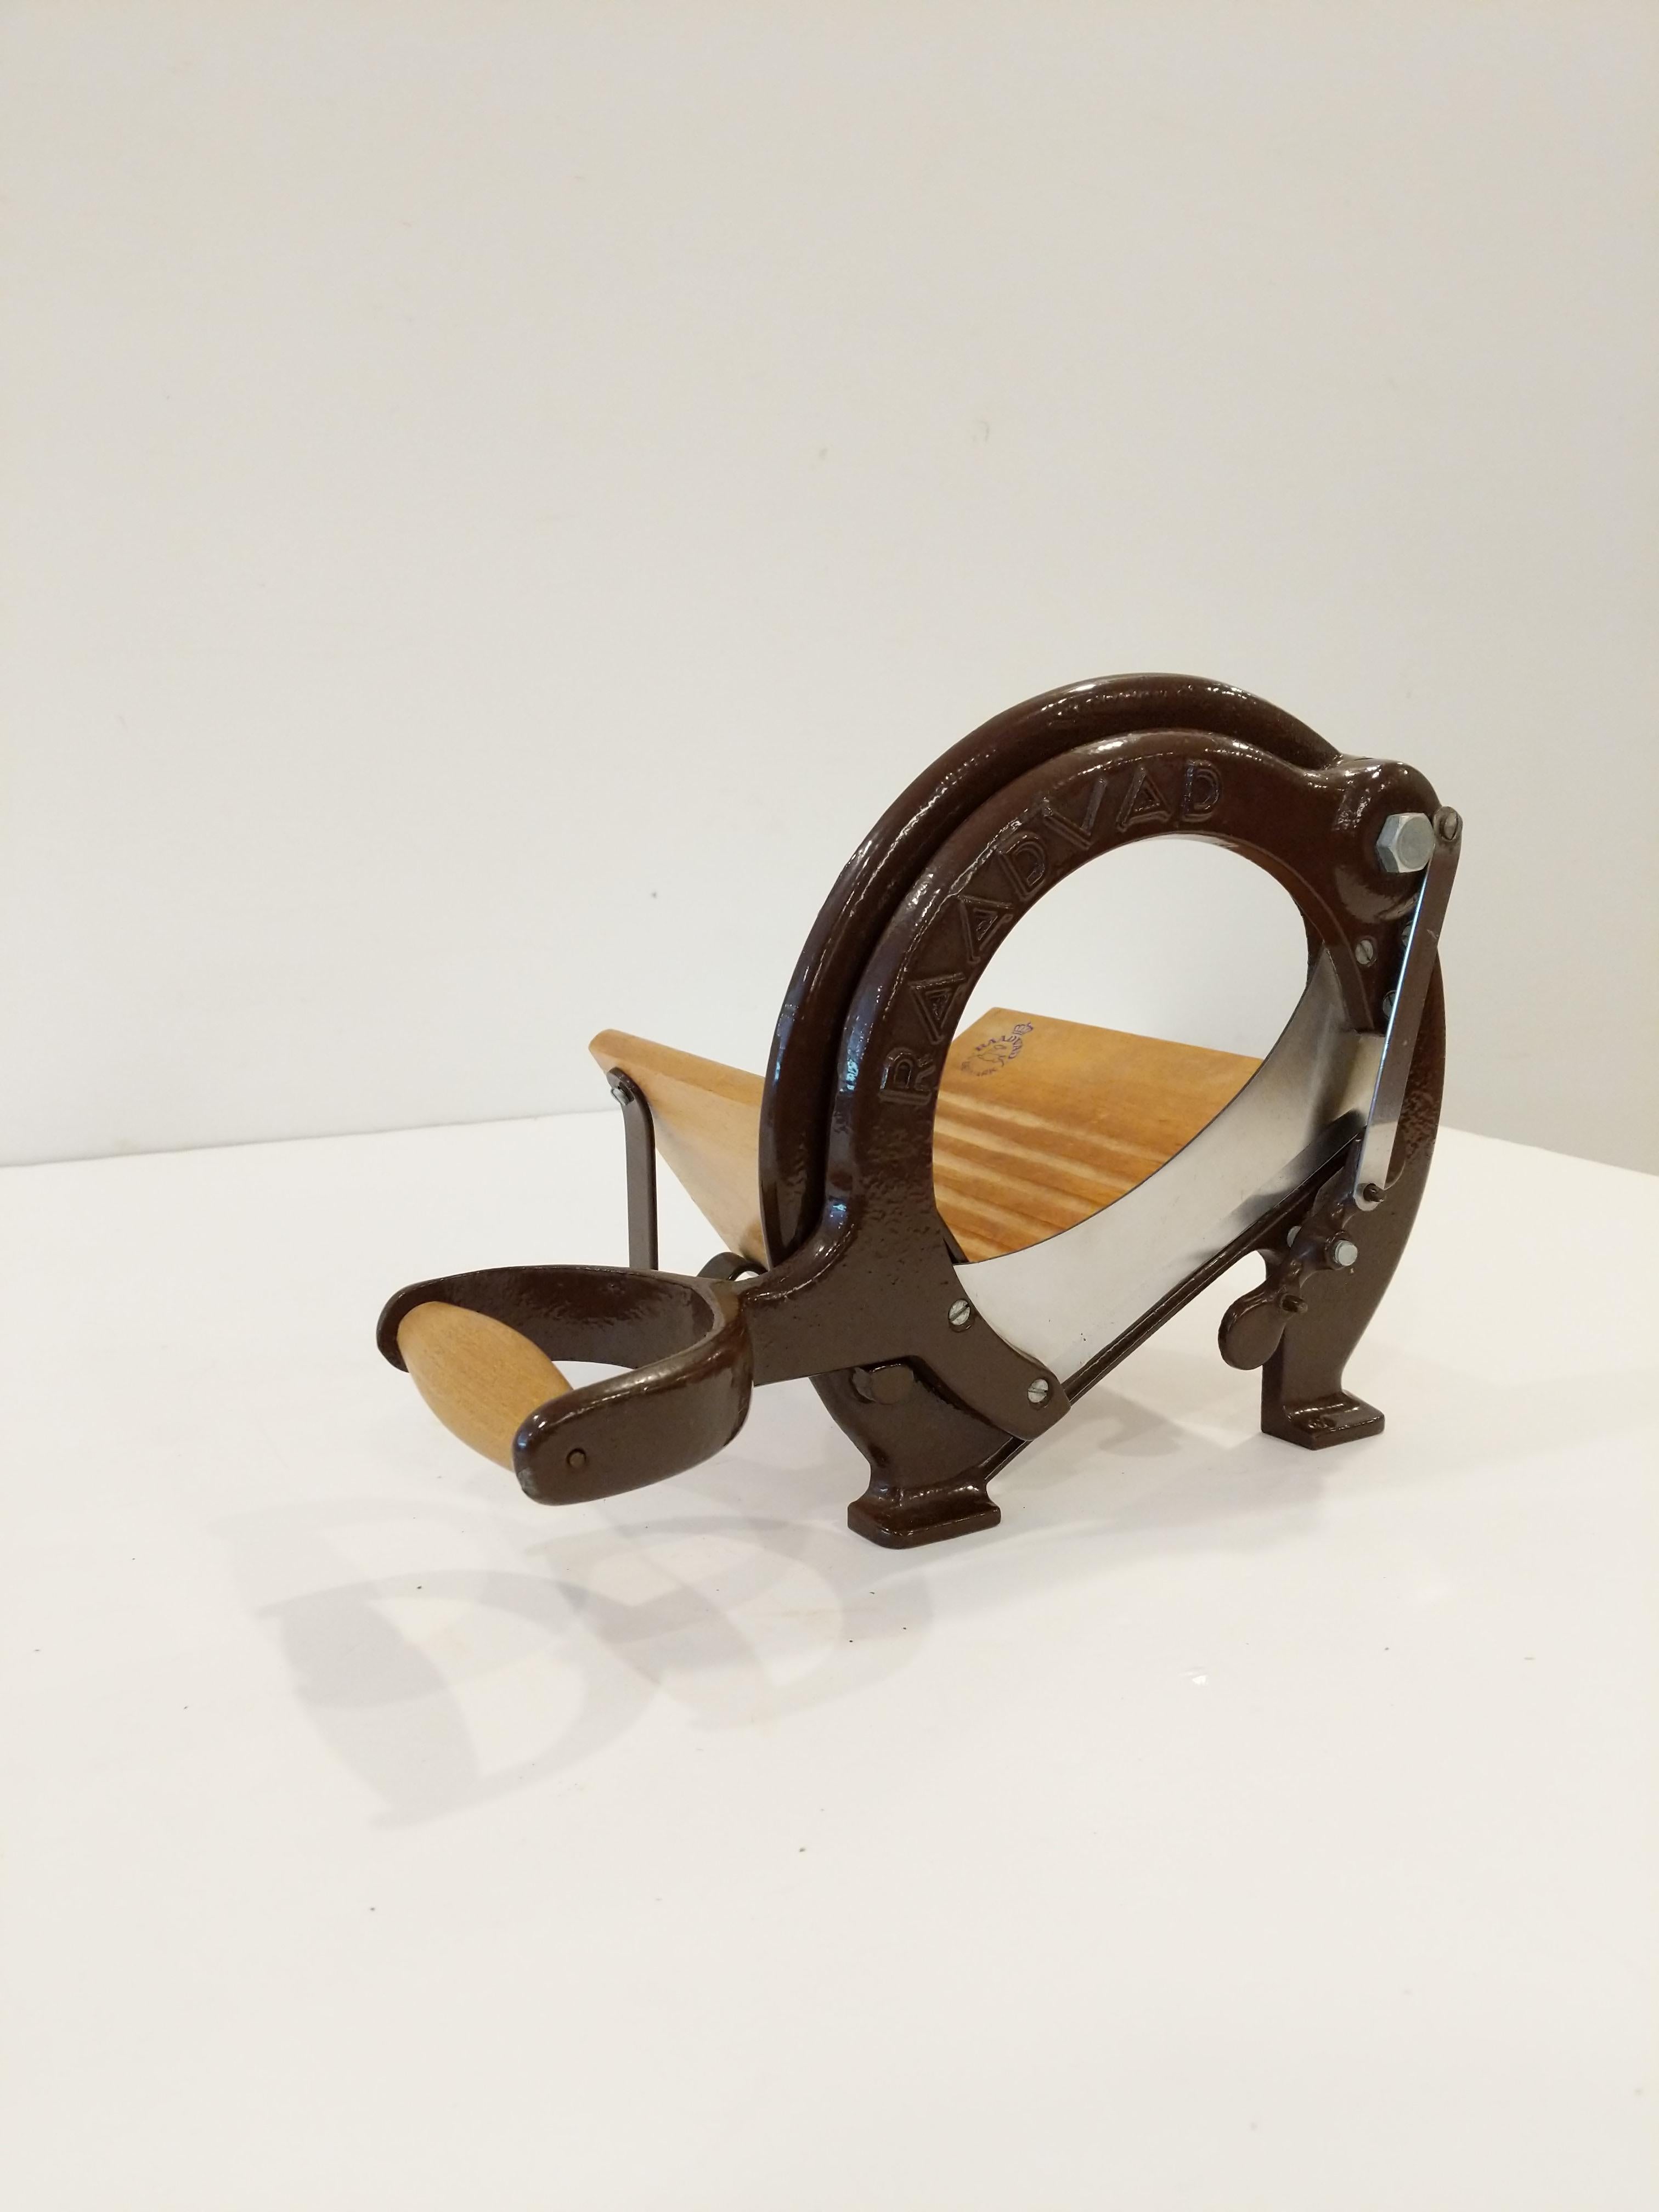 Authentic vintage Danish bread slicer / guillotine in brown.

Model 294 by Raadvad.

This slicer is in good condition overall and expectedly shows its age a bit.

Dimensions:
13.5” Long including handle
9.5” Tall
8” Wide

Ref: RV27-011